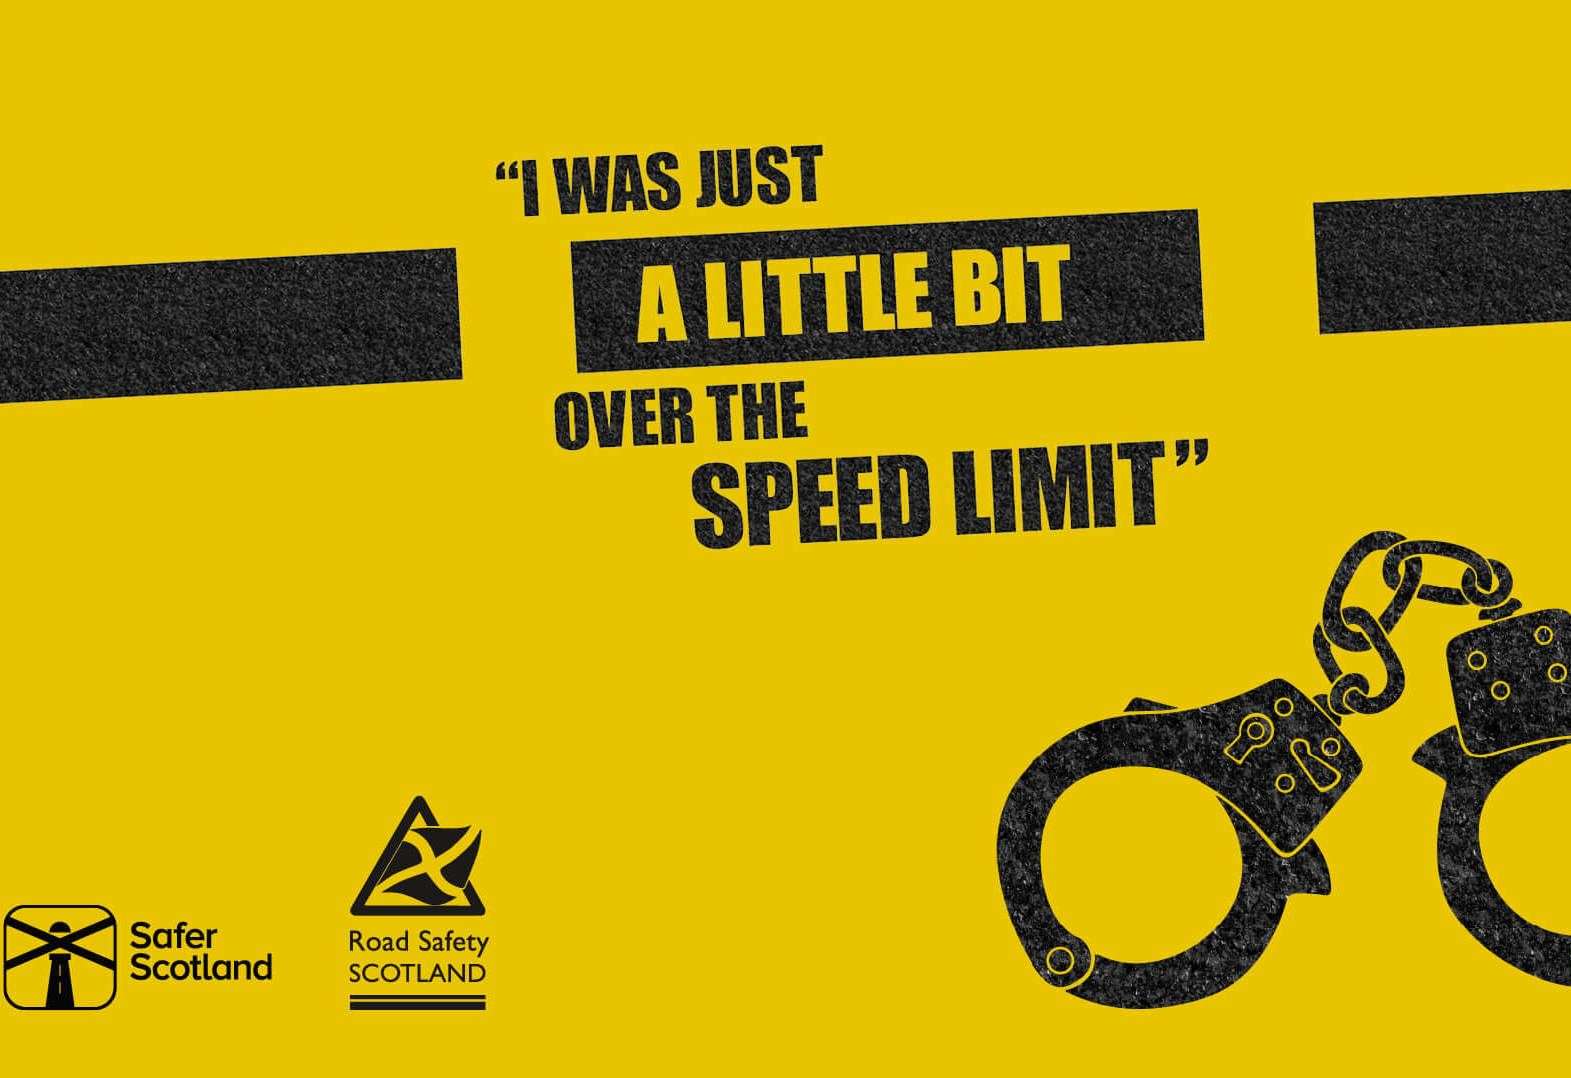 A poster from the campaign drives home the anti-speeding message.